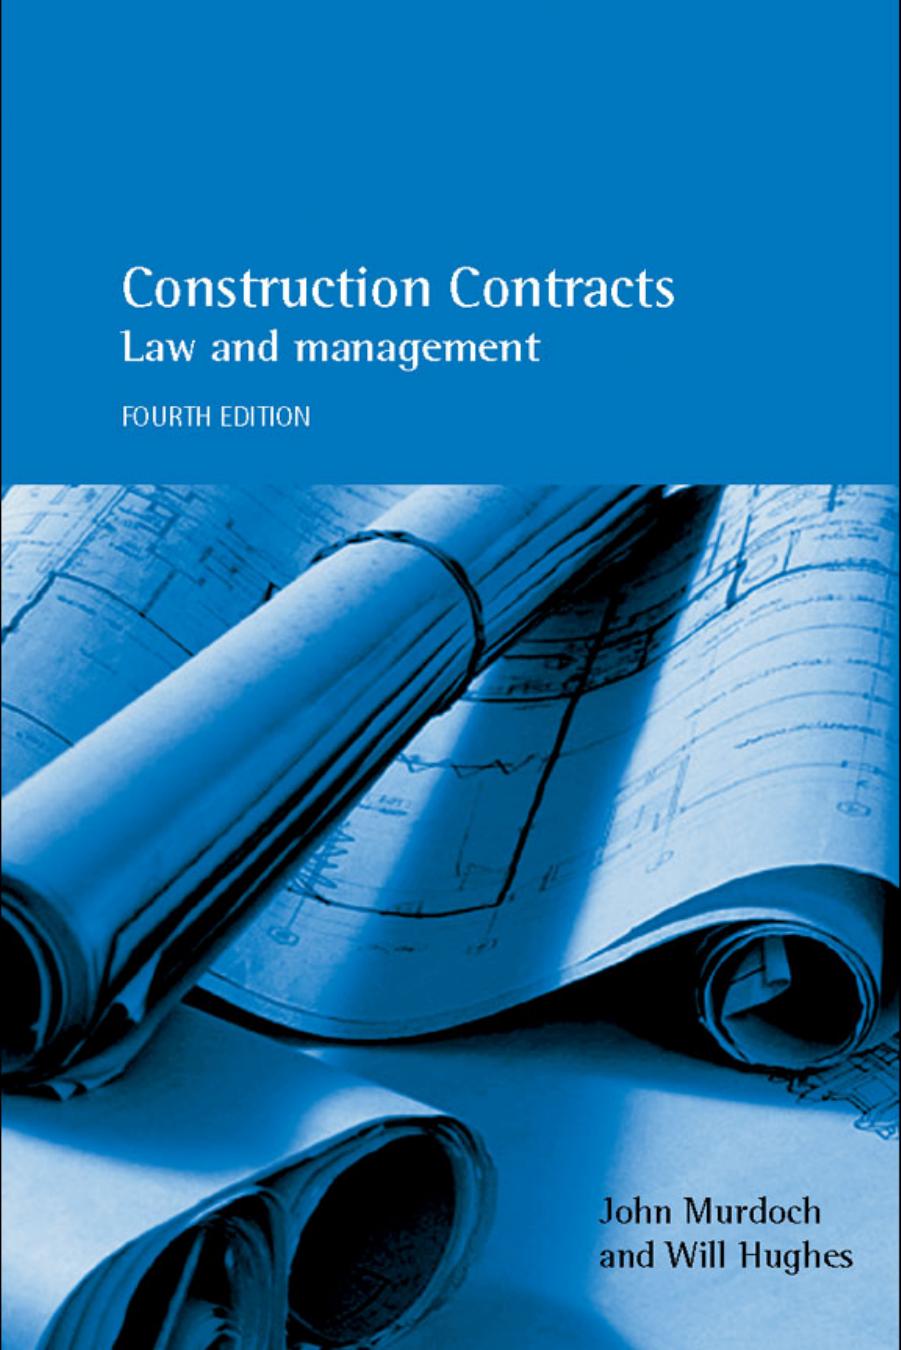 Construction Contracts: Law and Management, Fourth Edition